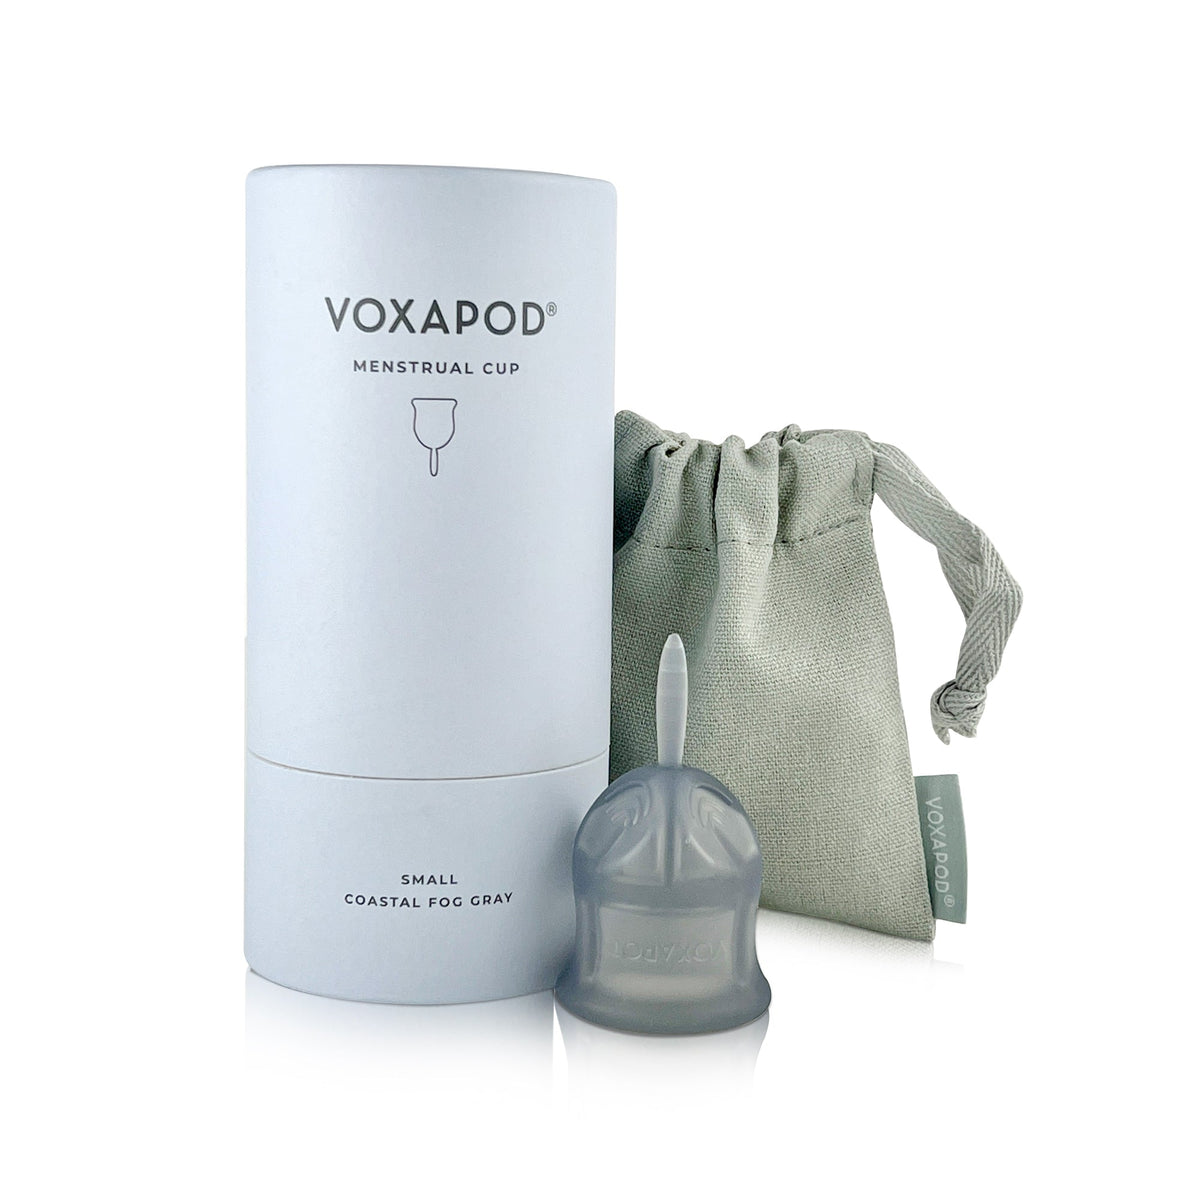 VOXAPOD Menstrual Cup - VOXAPOD® soft reusable medical grade silicone fda approved period cup